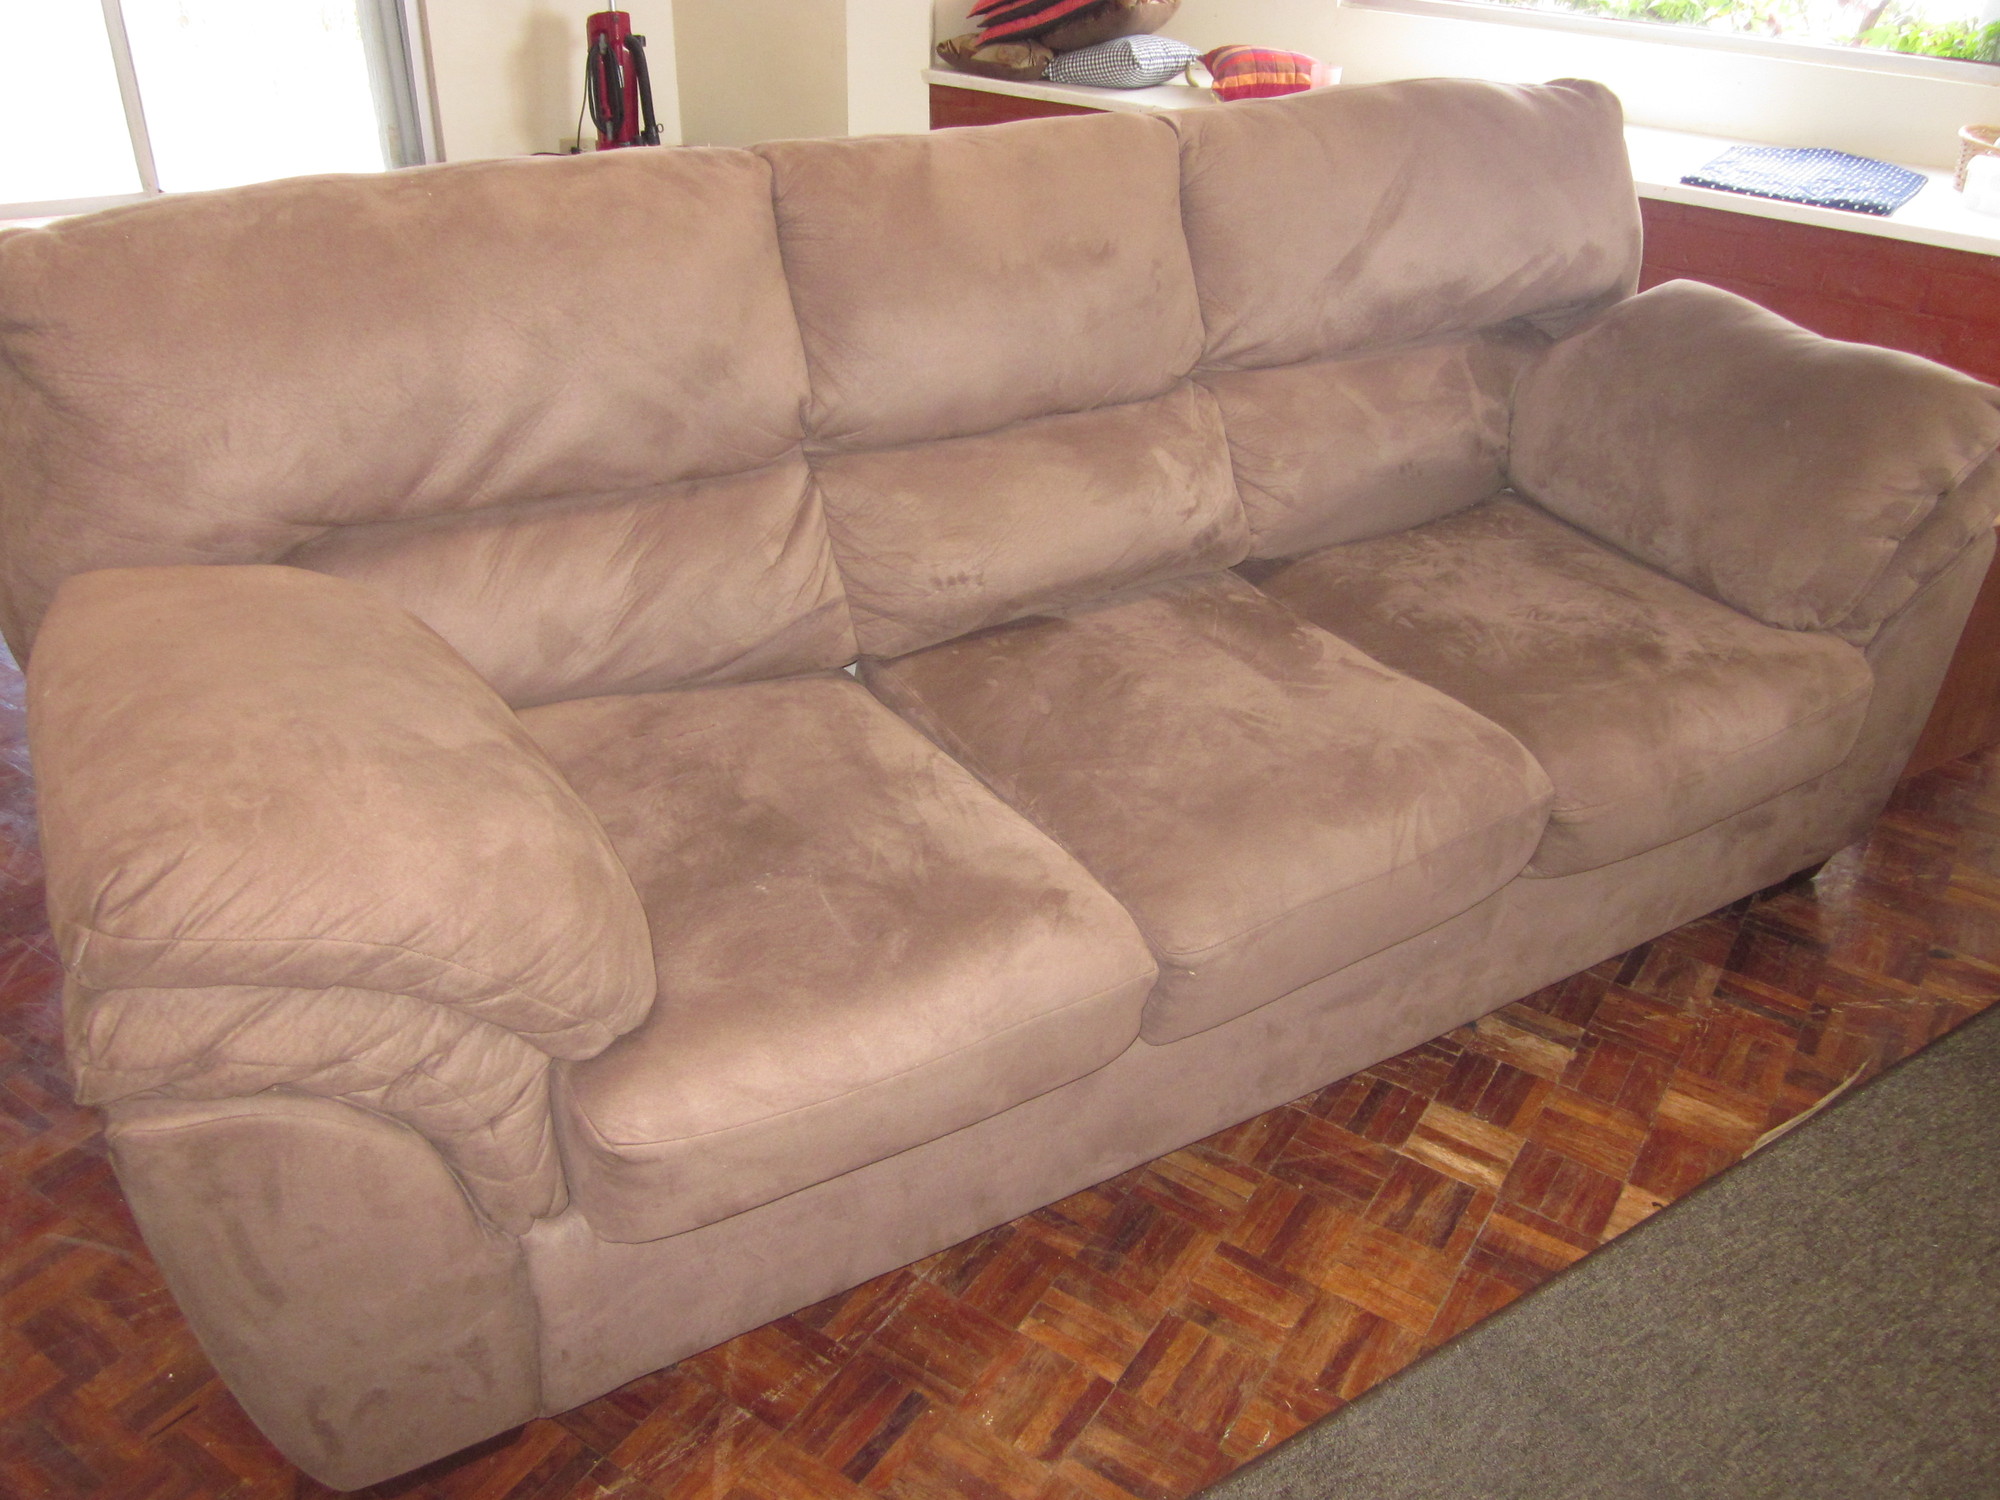 Couch set (3 seat and 2 seat)